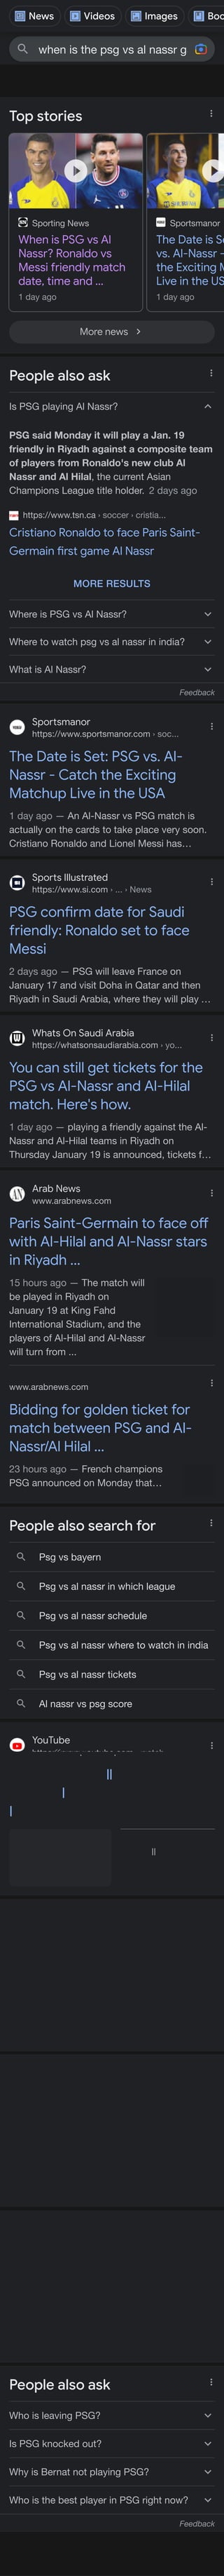 when is the psg vs al nassr game
Top stories
Sporting News
When is PSG vs Al
Nassr? Ronaldo vs
Messi friendly match
date, time and ...
1 day ago
Sportsmanor
The Date is Se
vs. Al-Nassr -
the Exciting M
Live in the US
1 day ago
More news
People also ask
Is PSG playing Al Nassr?
PSG said Monday it will play a Jan. 19
friendly in Riyadh against a composite team
of players from Ronaldo's new club Al
Nassr and Al Hilal, the current Asian
Champions League title holder. 2 days ago
https://www.tsn.ca › soccer › cristia...
Cristiano Ronaldo to face Paris Saint-
Germain !rst game Al Nassr
MORE RESULTS
Where is PSG vs Al Nassr?
Where to watch psg vs al nassr in india?
What is Al Nassr?
Feedback
Sportsmanor
https://www.sportsmanor.com › soc...
The Date is Set: PSG vs. Al-
Nassr - Catch the Exciting
Matchup Live in the USA
1 day ago — An Al-Nassr vs PSG match is
actually on the cards to take place very soon.
Cristiano Ronaldo and Lionel Messi has…
Sports Illustrated
https://www.si.com › ... › News
PSG con!rm date for Saudi
friendly: Ronaldo set to face
Messi
2 days ago — PSG will leave France on
January 17 and visit Doha in Qatar and then
Riyadh in Saudi Arabia, where they will play …
Whats On Saudi Arabia
https://whatsonsaudiarabia.com › yo...
You can still get tickets for the
PSG vs Al-Nassr and Al-Hilal
match. Here's how.
1 day ago — playing a friendly against the Al-
Nassr and Al-Hilal teams in Riyadh on
Thursday January 19 is announced, tickets f…
Arab News
www.arabnews.com
Paris Saint-Germain to face o"
with Al-Hilal and Al-Nassr stars
in Riyadh ...
15 hours ago — The match will
be played in Riyadh on
January 19 at King Fahd
International Stadium, and the
players of Al-Hilal and Al-Nassr
will turn from ...
www.arabnews.com
Bidding for golden ticket for
match between PSG and Al-
Nassr/Al Hilal ...
23 hours ago — French champions
PSG announced on Monday that…
Messi will play in the friendly against
People also search for
Psg vs bayern
Psg vs al nassr in which league
Psg vs al nassr schedule
Psg vs al nassr where to watch in india
Psg vs al nassr tickets
Al nassr vs psg score
YouTube
https://www.youtube.com › watch
PSG vs Saudi All Star 2023 Date,
Time, Telecast, Live Stream in
India
3:30
UPLOADED BY:
FootballTube
POSTED:
13 hours ago
InsideSport.IN
https://www.insidesport.in › ronaldo...
Ronaldo vs Messi Friendly: Paris
Saint-Germain con!rm dates
for Al Nassr ...
1 day ago — PSG will depart France on
January 17 for Doha, Qatar, and then Riyadh,
Saudi Arabia, where they will go on January …
sportstar.thehindu.com
https://sportstar.thehindu.com › arti...
Messi and Ronaldo to meet in
friendly between PSG and
Saudi select
1 day ago — Lionel Messi and Paris Saint-
Germain will play a friendly against a select
side made up of players from Cristiano…
FourFourTwo
https://www.fourfourtwo.com › news
PSG con!rm game against all-
star XI from Cristiano Ronaldo's
Al-Nassr and ...
1 day ago — Paris Saint-Germain have
confirmed they will take on an all-star XI from
Saudi Pro League sides Al-Hilal and Al-Nass…
People also ask
Who is leaving PSG?
Is PSG knocked out?
Why is Bernat not playing PSG?
Who is the best player in PSG right now?
Feedback
See more
News Videos Images Boo
 